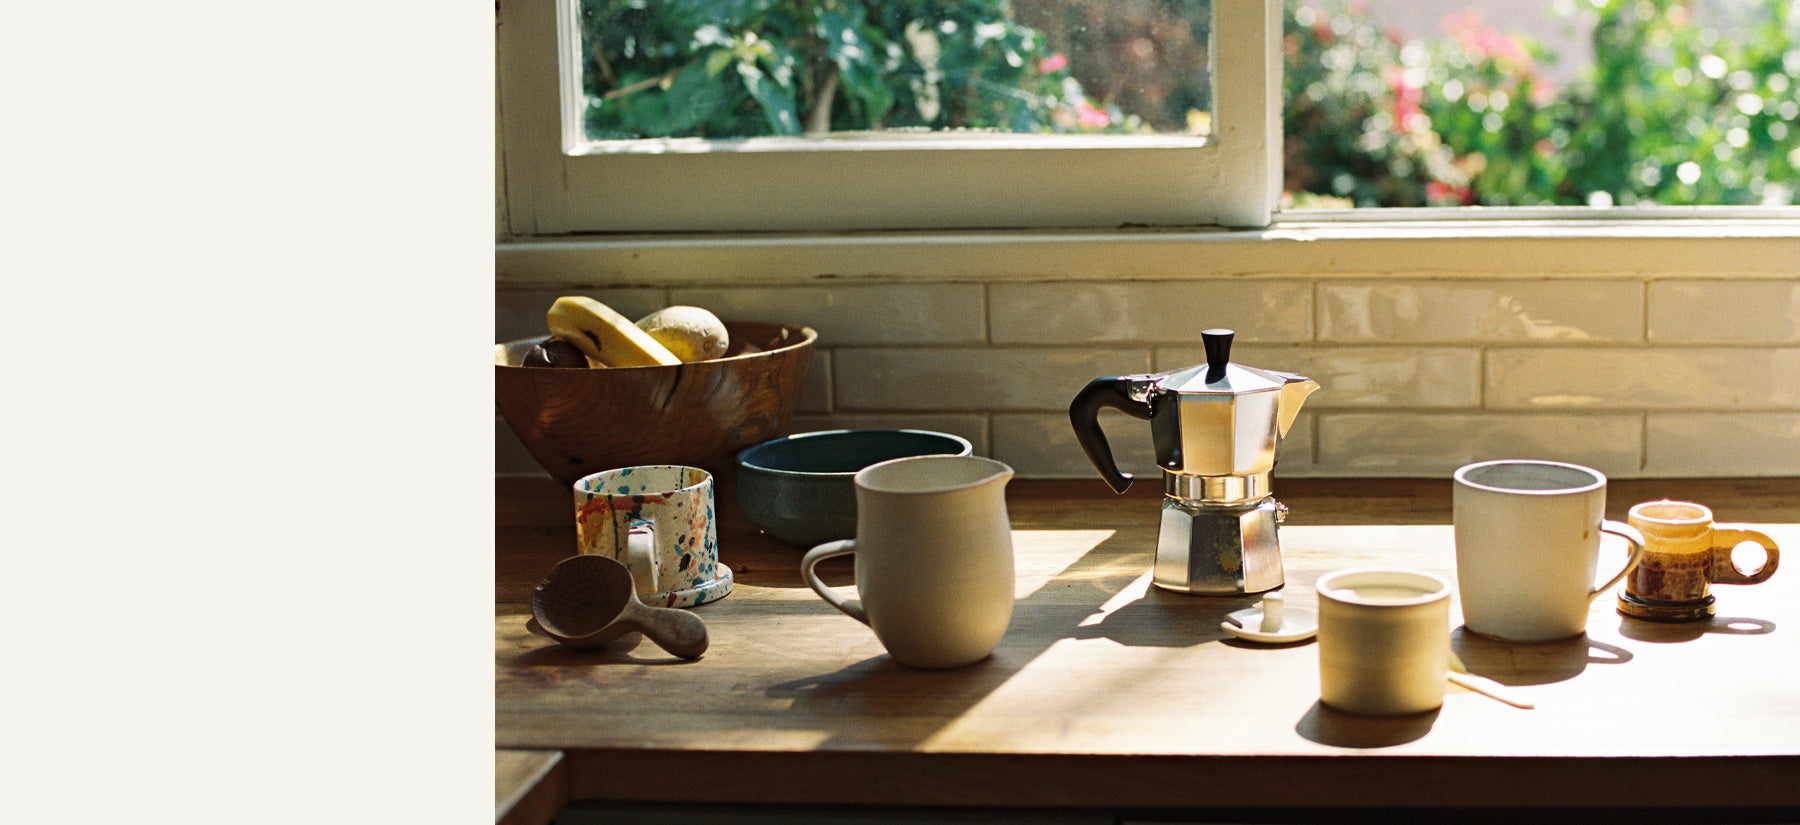 Ceramic mugs and a mokapot for coffee on a wooden counter